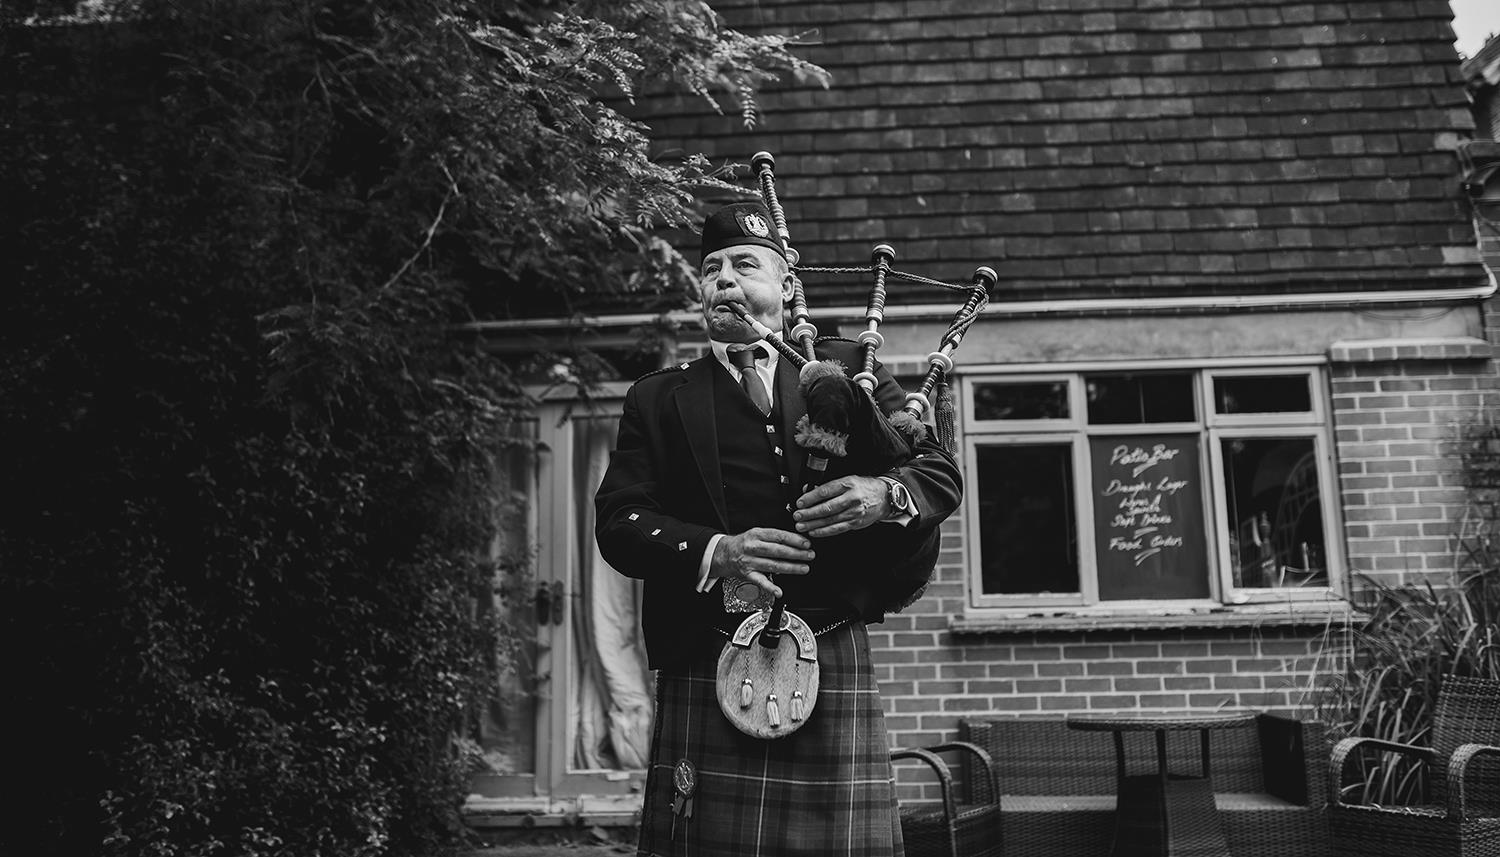 Bagpipes being played by man dressed in kilt. Photo Credit: Matthew Lawrence Photography